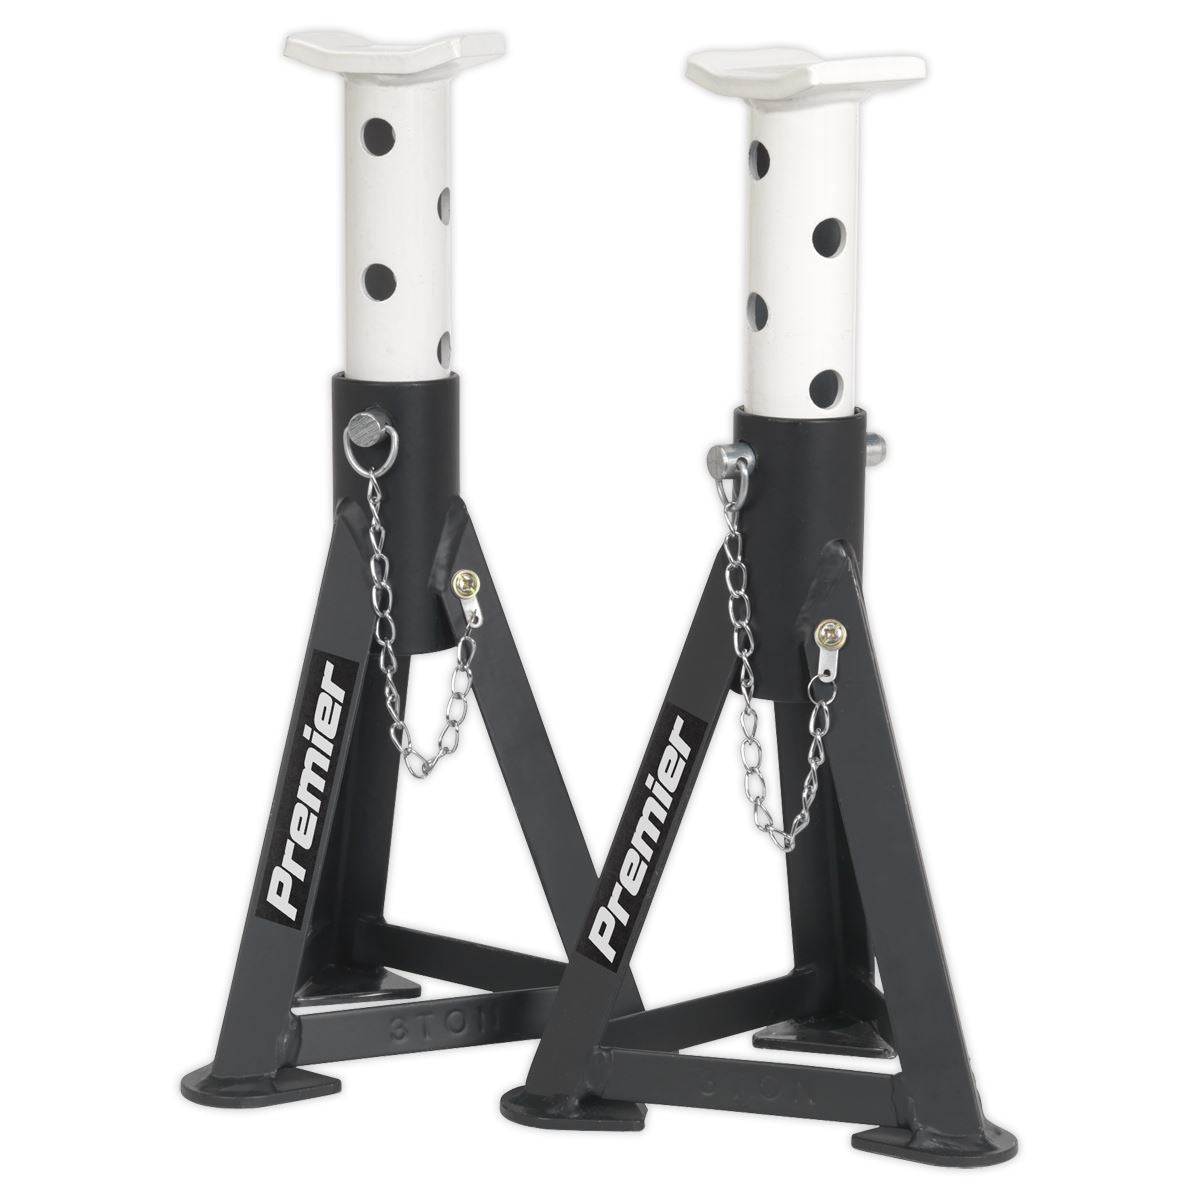 Sealey Premier Trolley Jack 3t & Axle Stands (Pair) 3t per Stand Combo